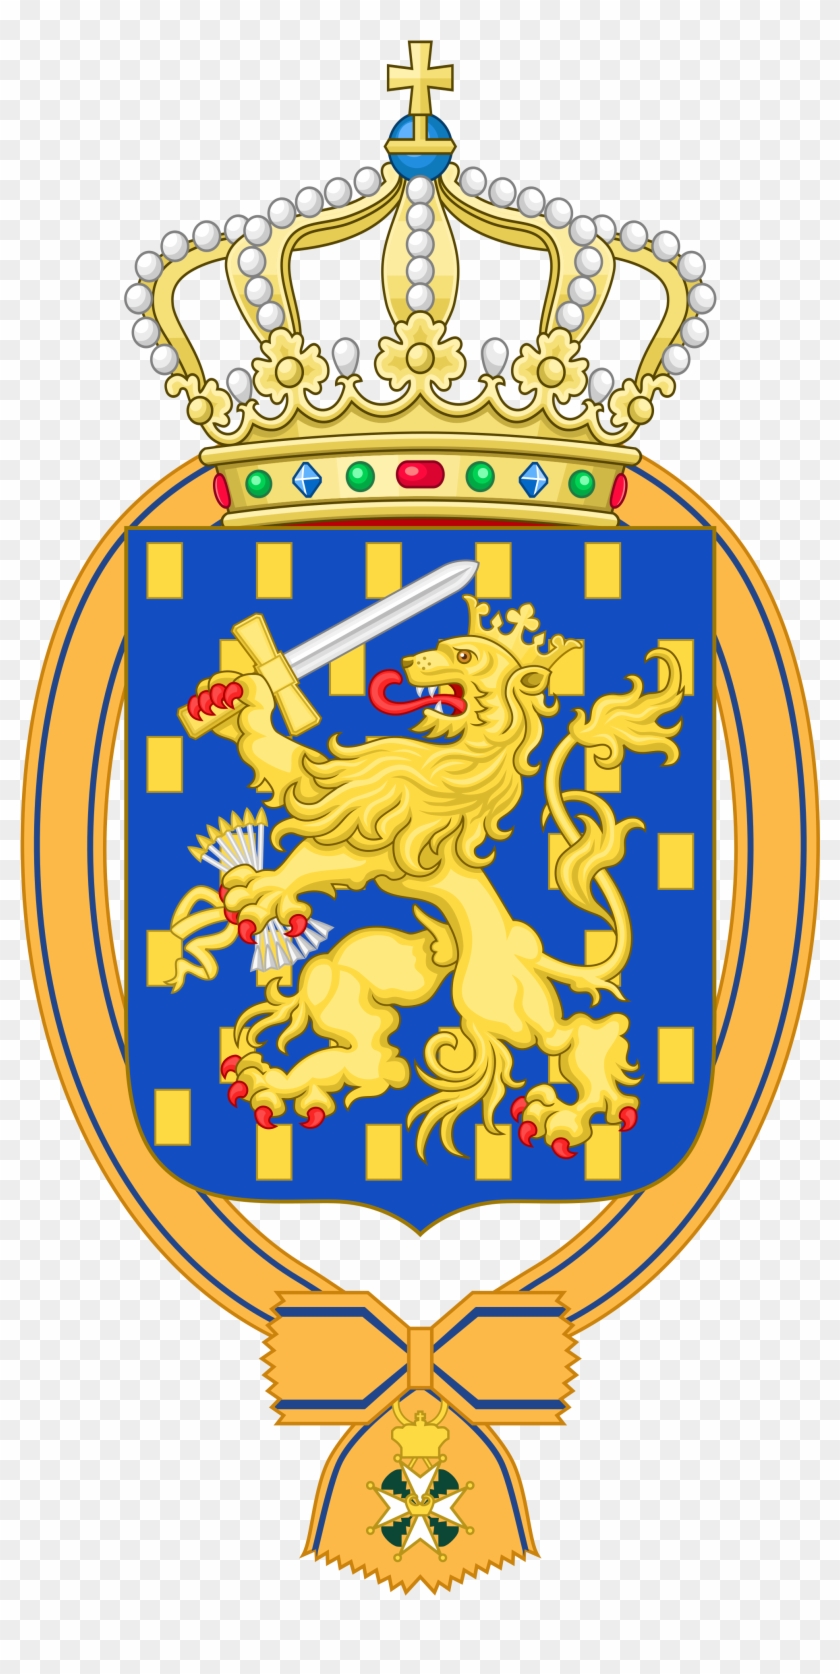 Open - Royal Arms Of The Netherlands Drinking Glass #1165316